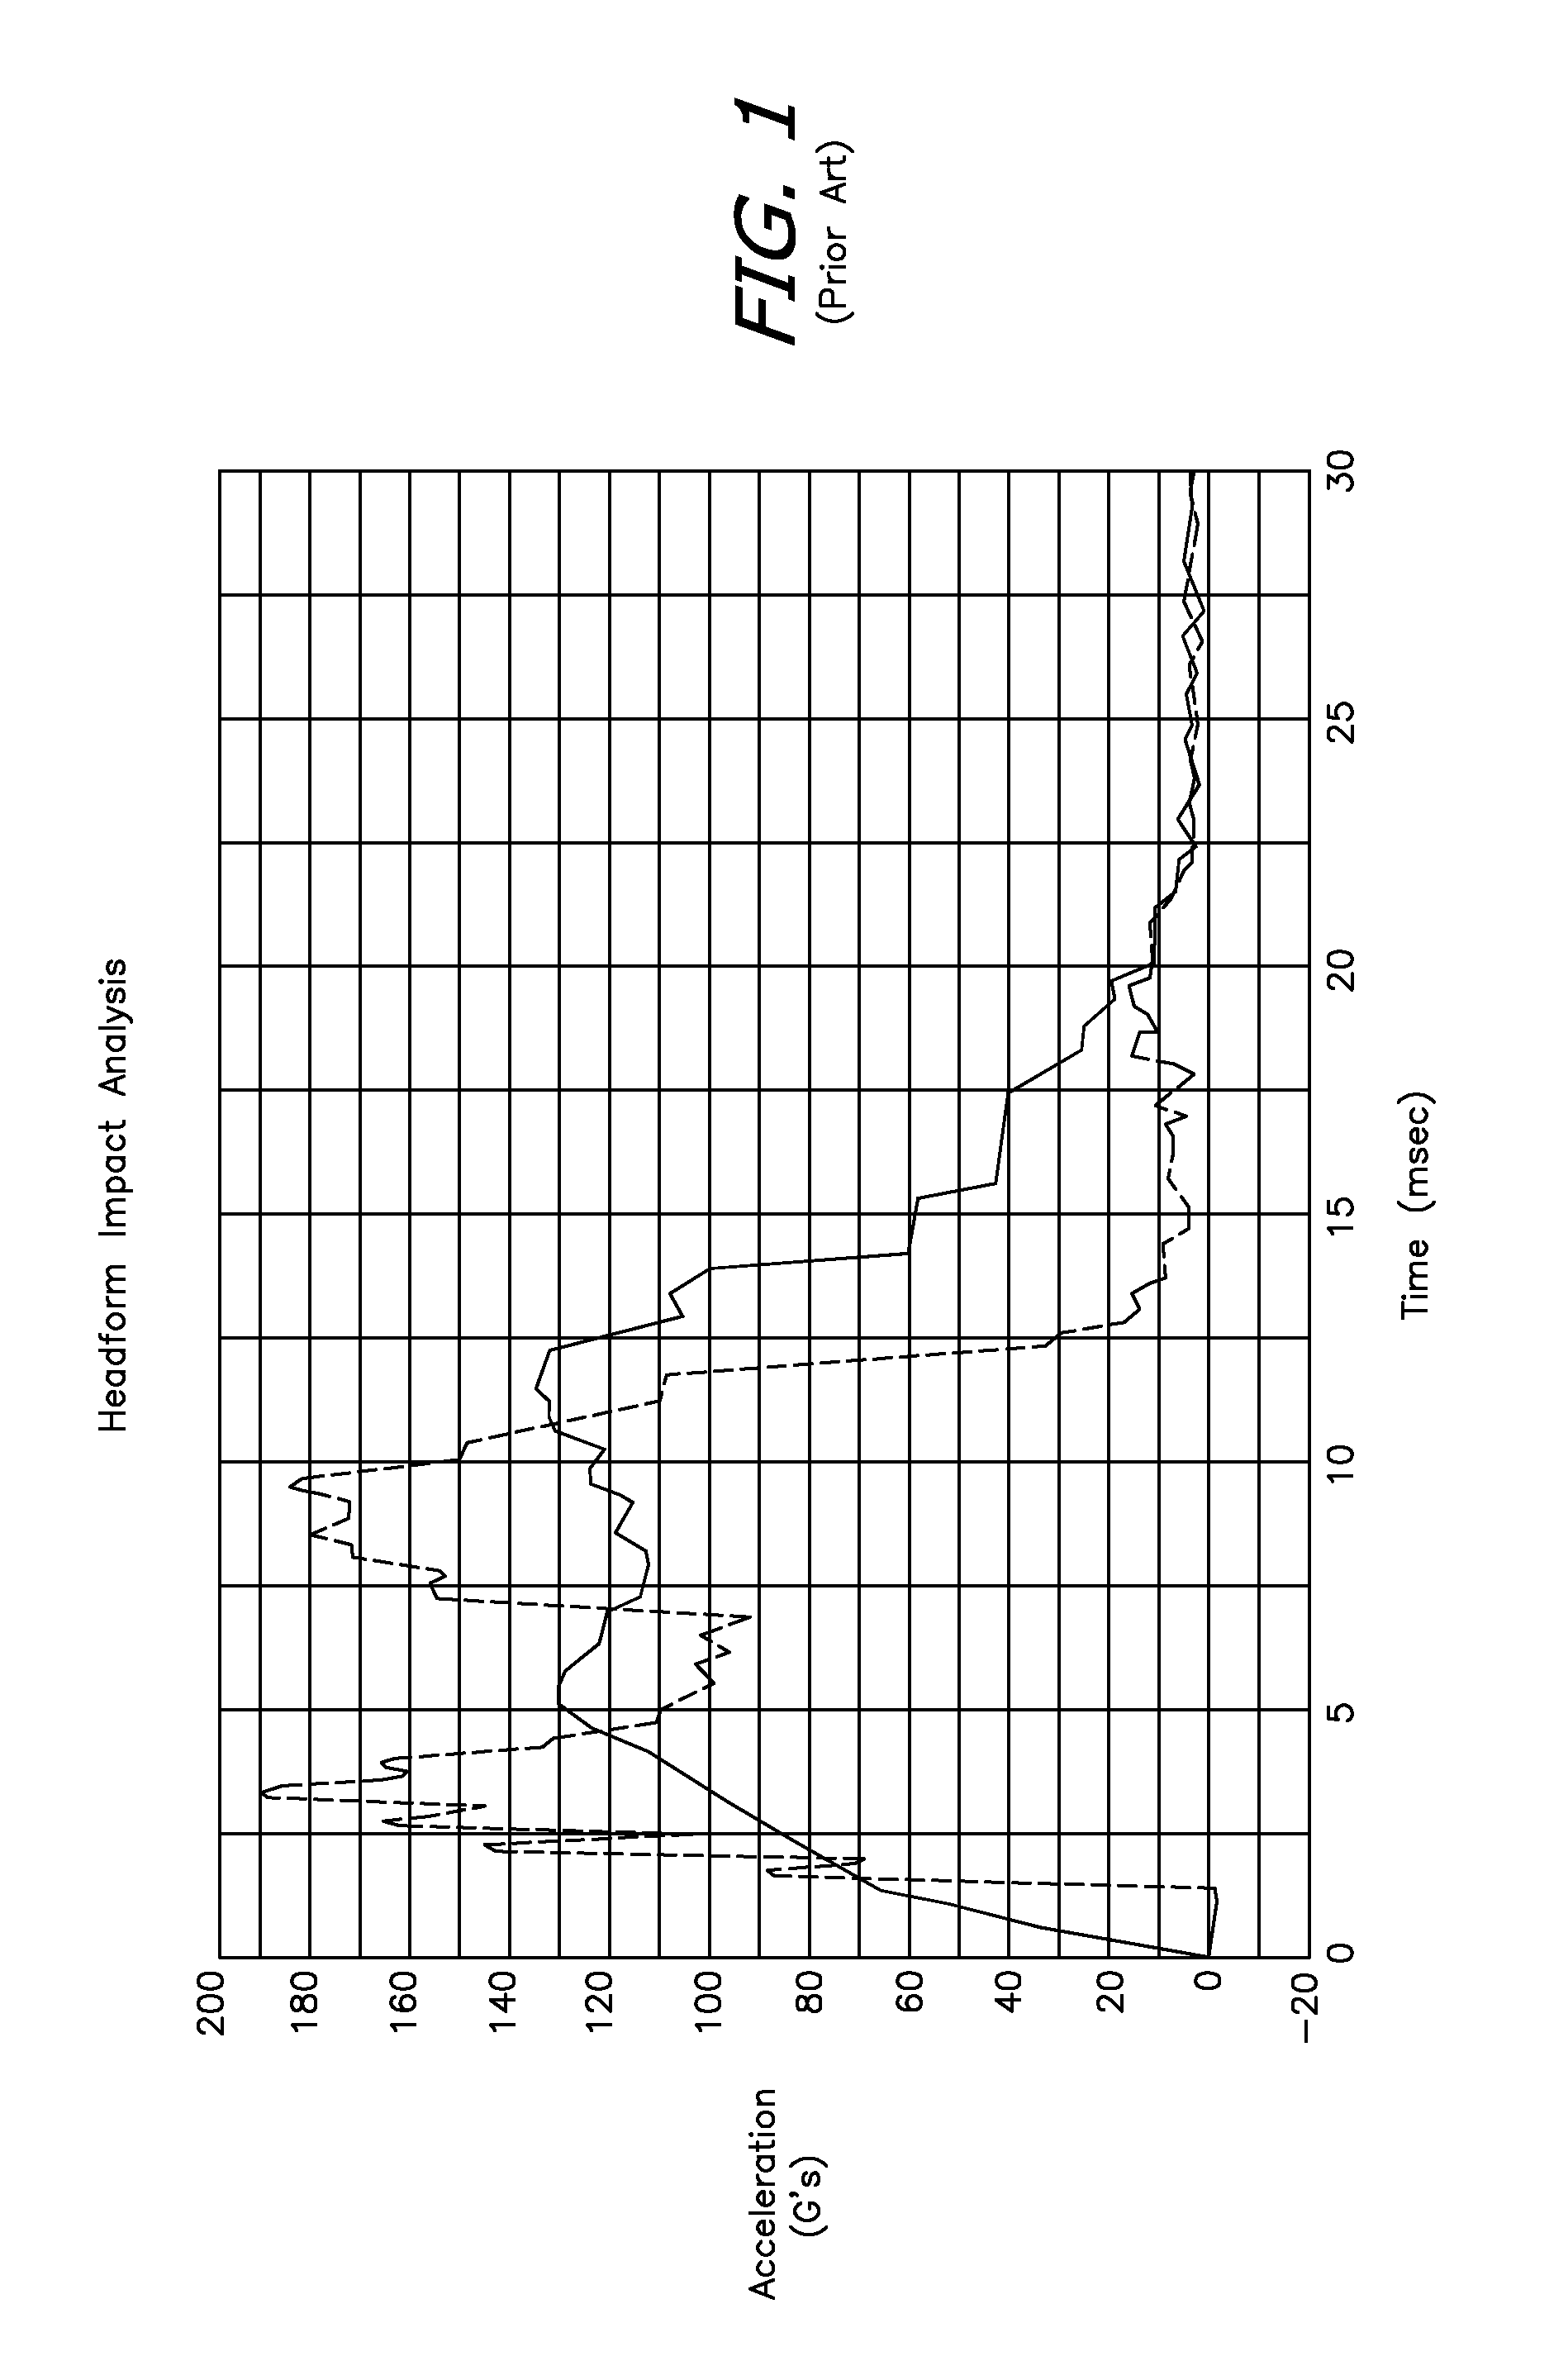 Pedestrian impact mitigation system and method of use